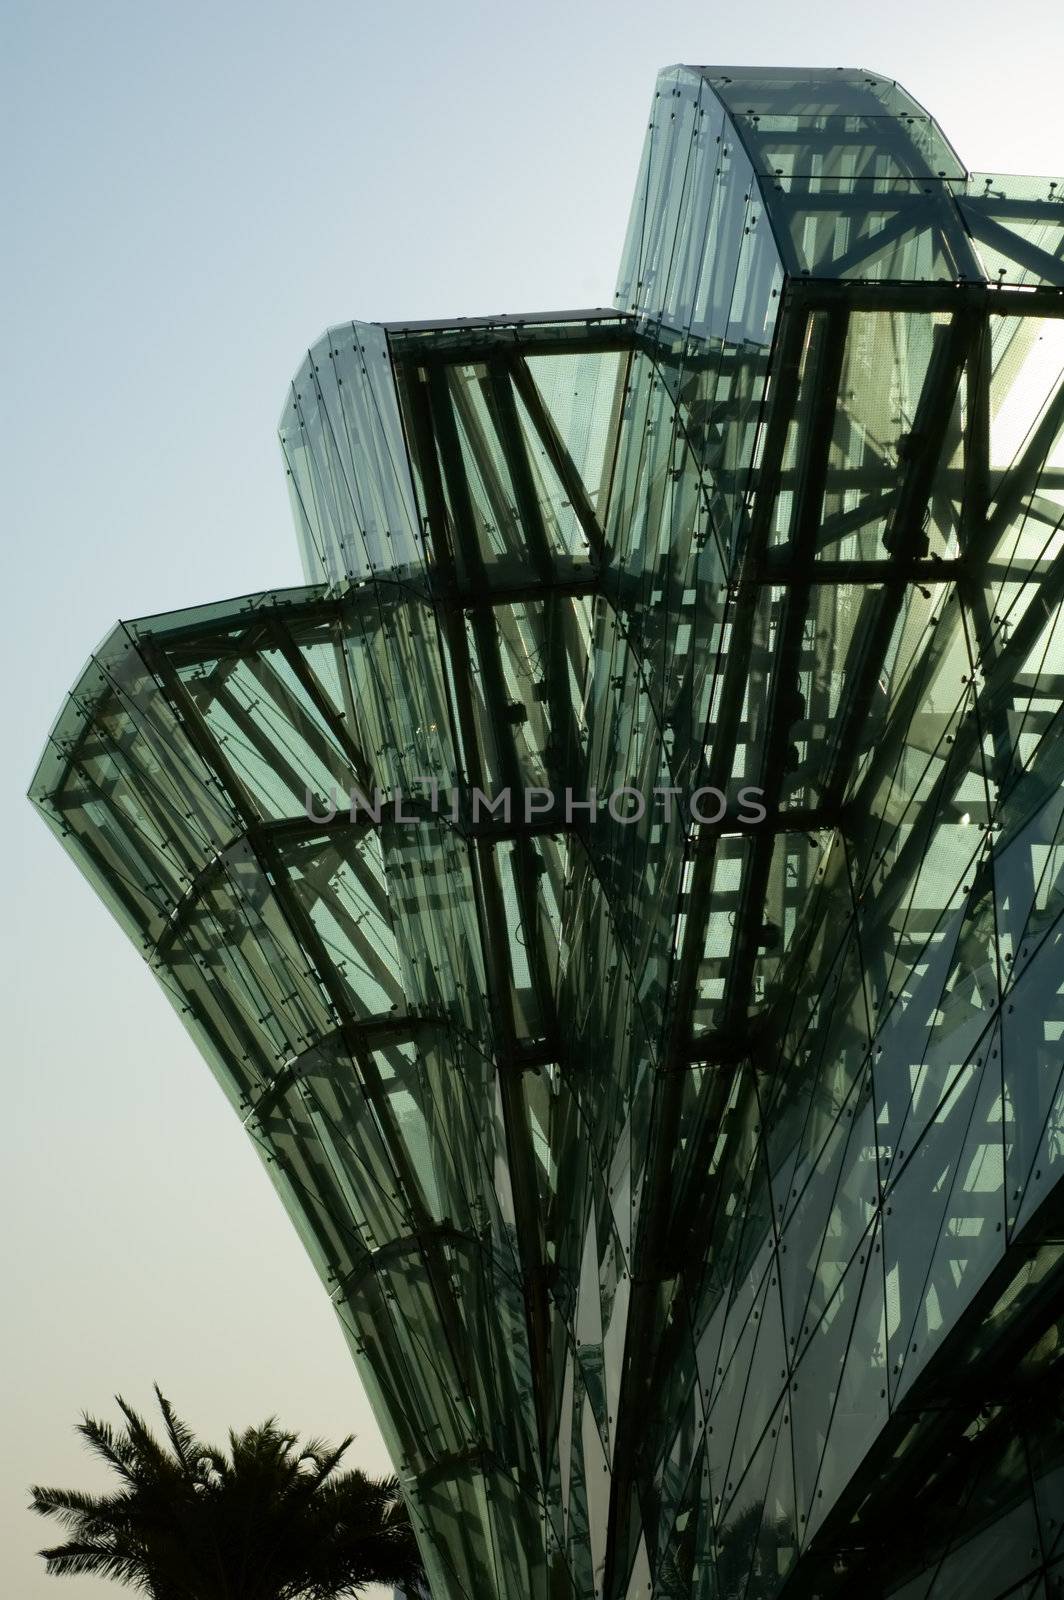 Abstract green glass of petals of lotus shaped architecture over sunshine